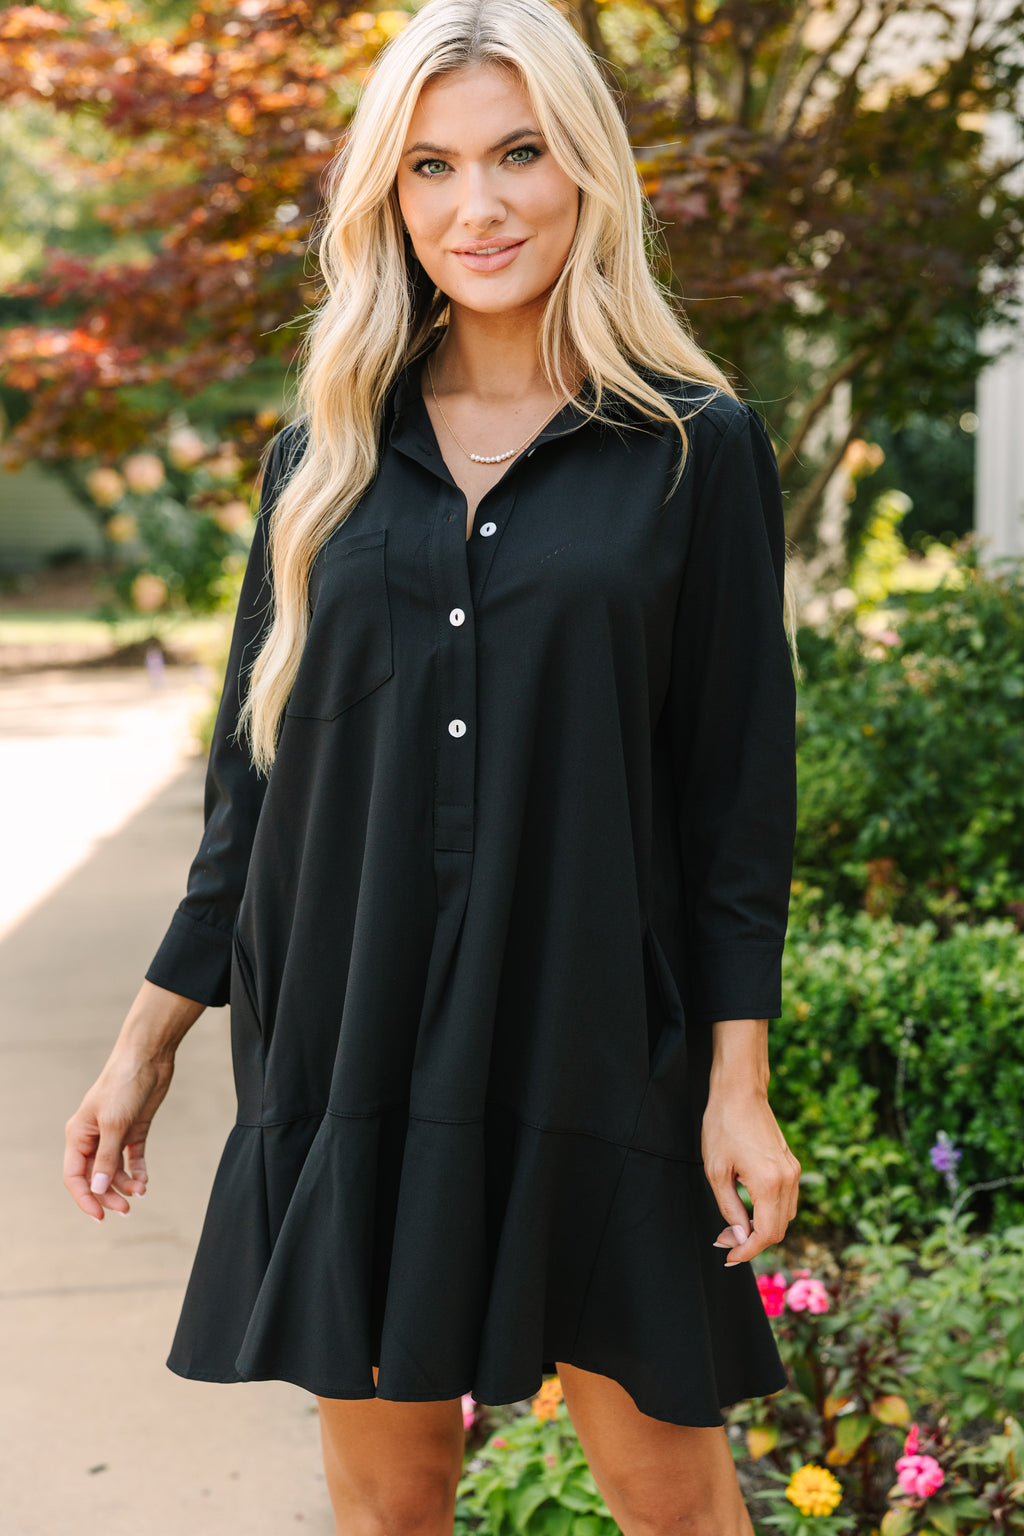 All The Drama I Need Black Feather Shift Dress – Shop the Mint